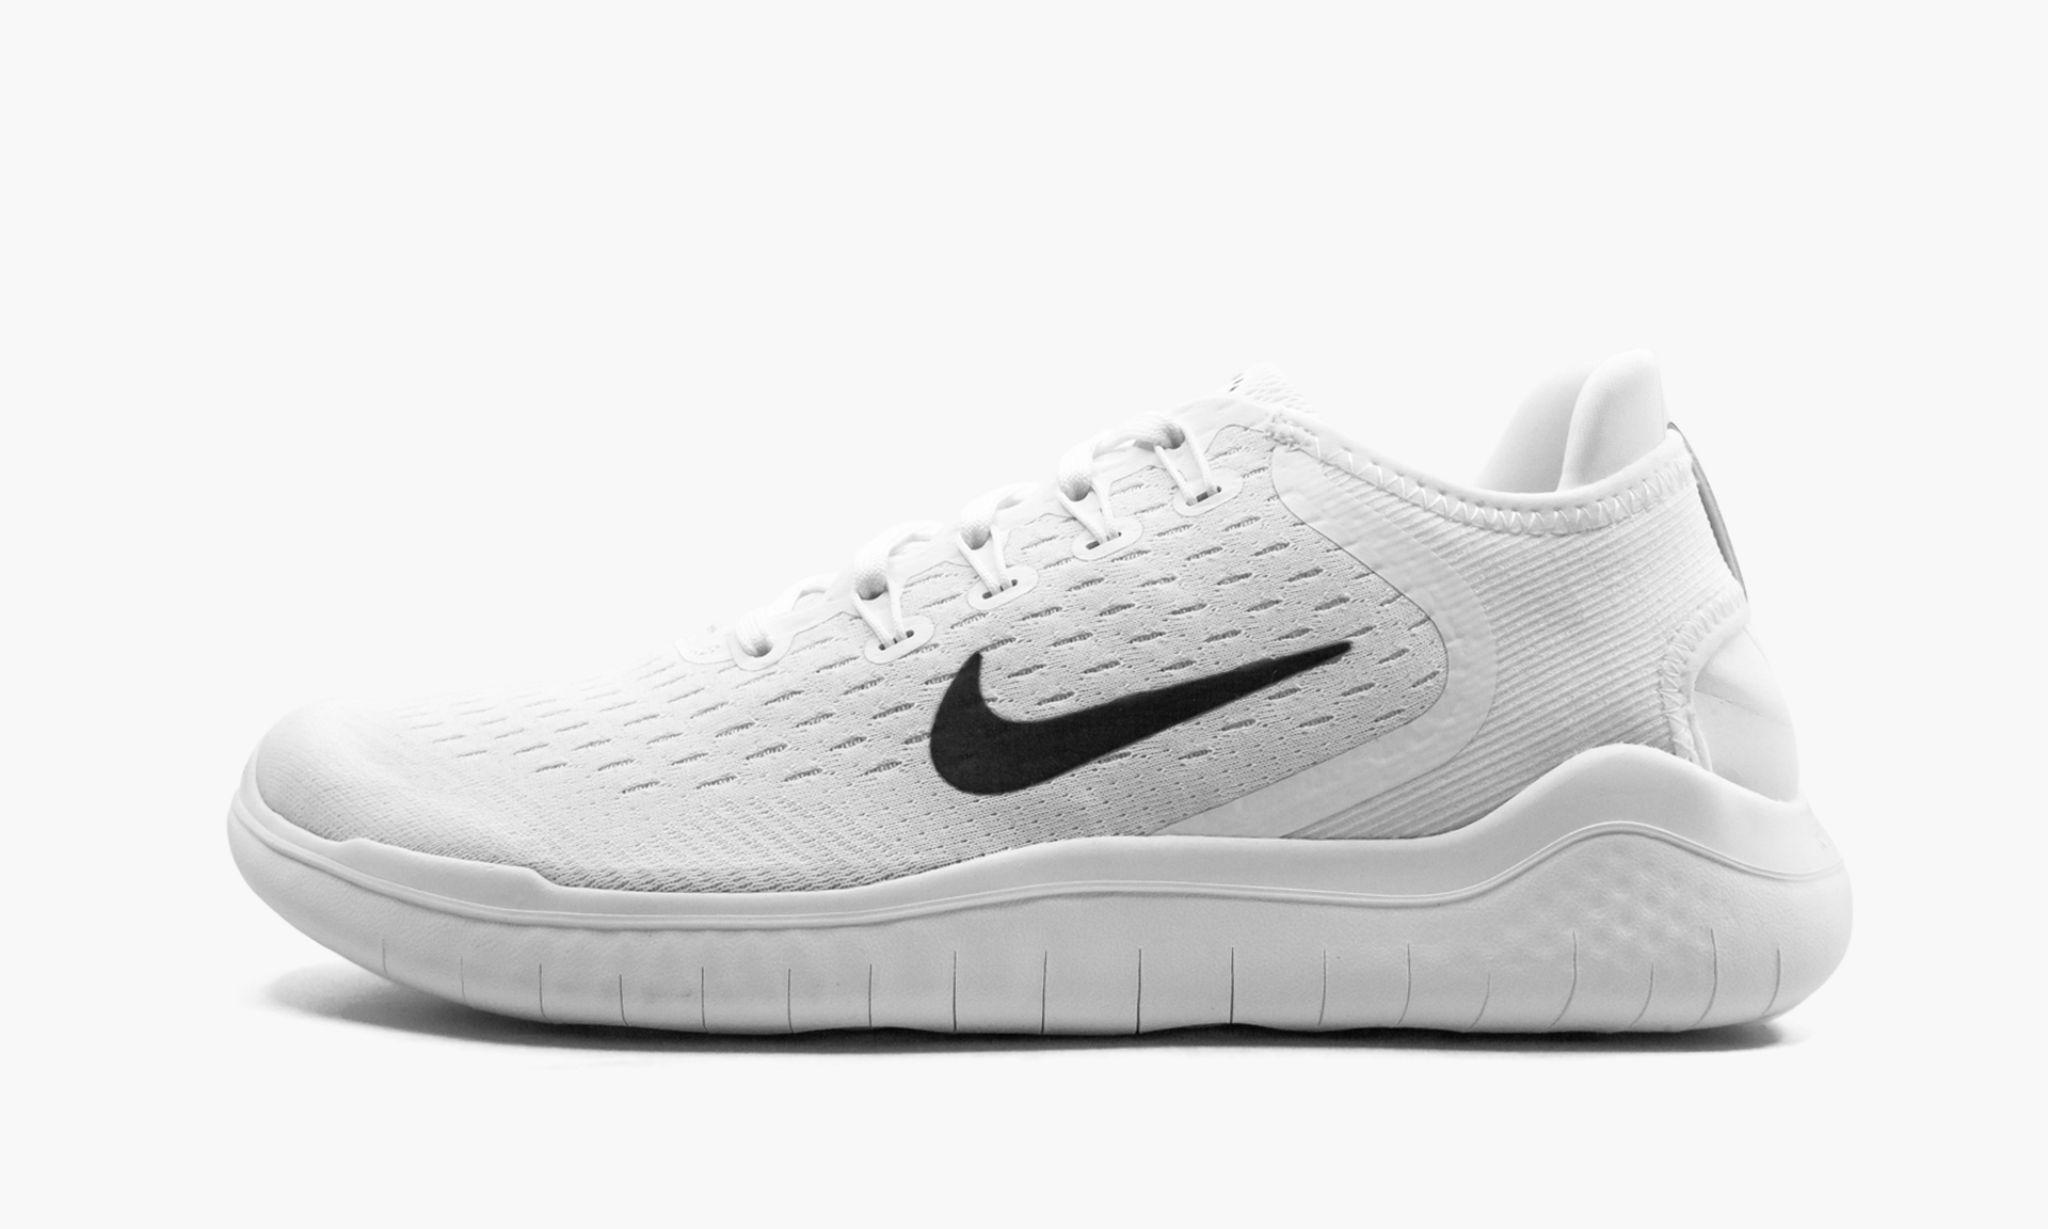 Nike Synthetic Free Rn 2018 in White,Black (White) for Men - Save 59% | Lyst